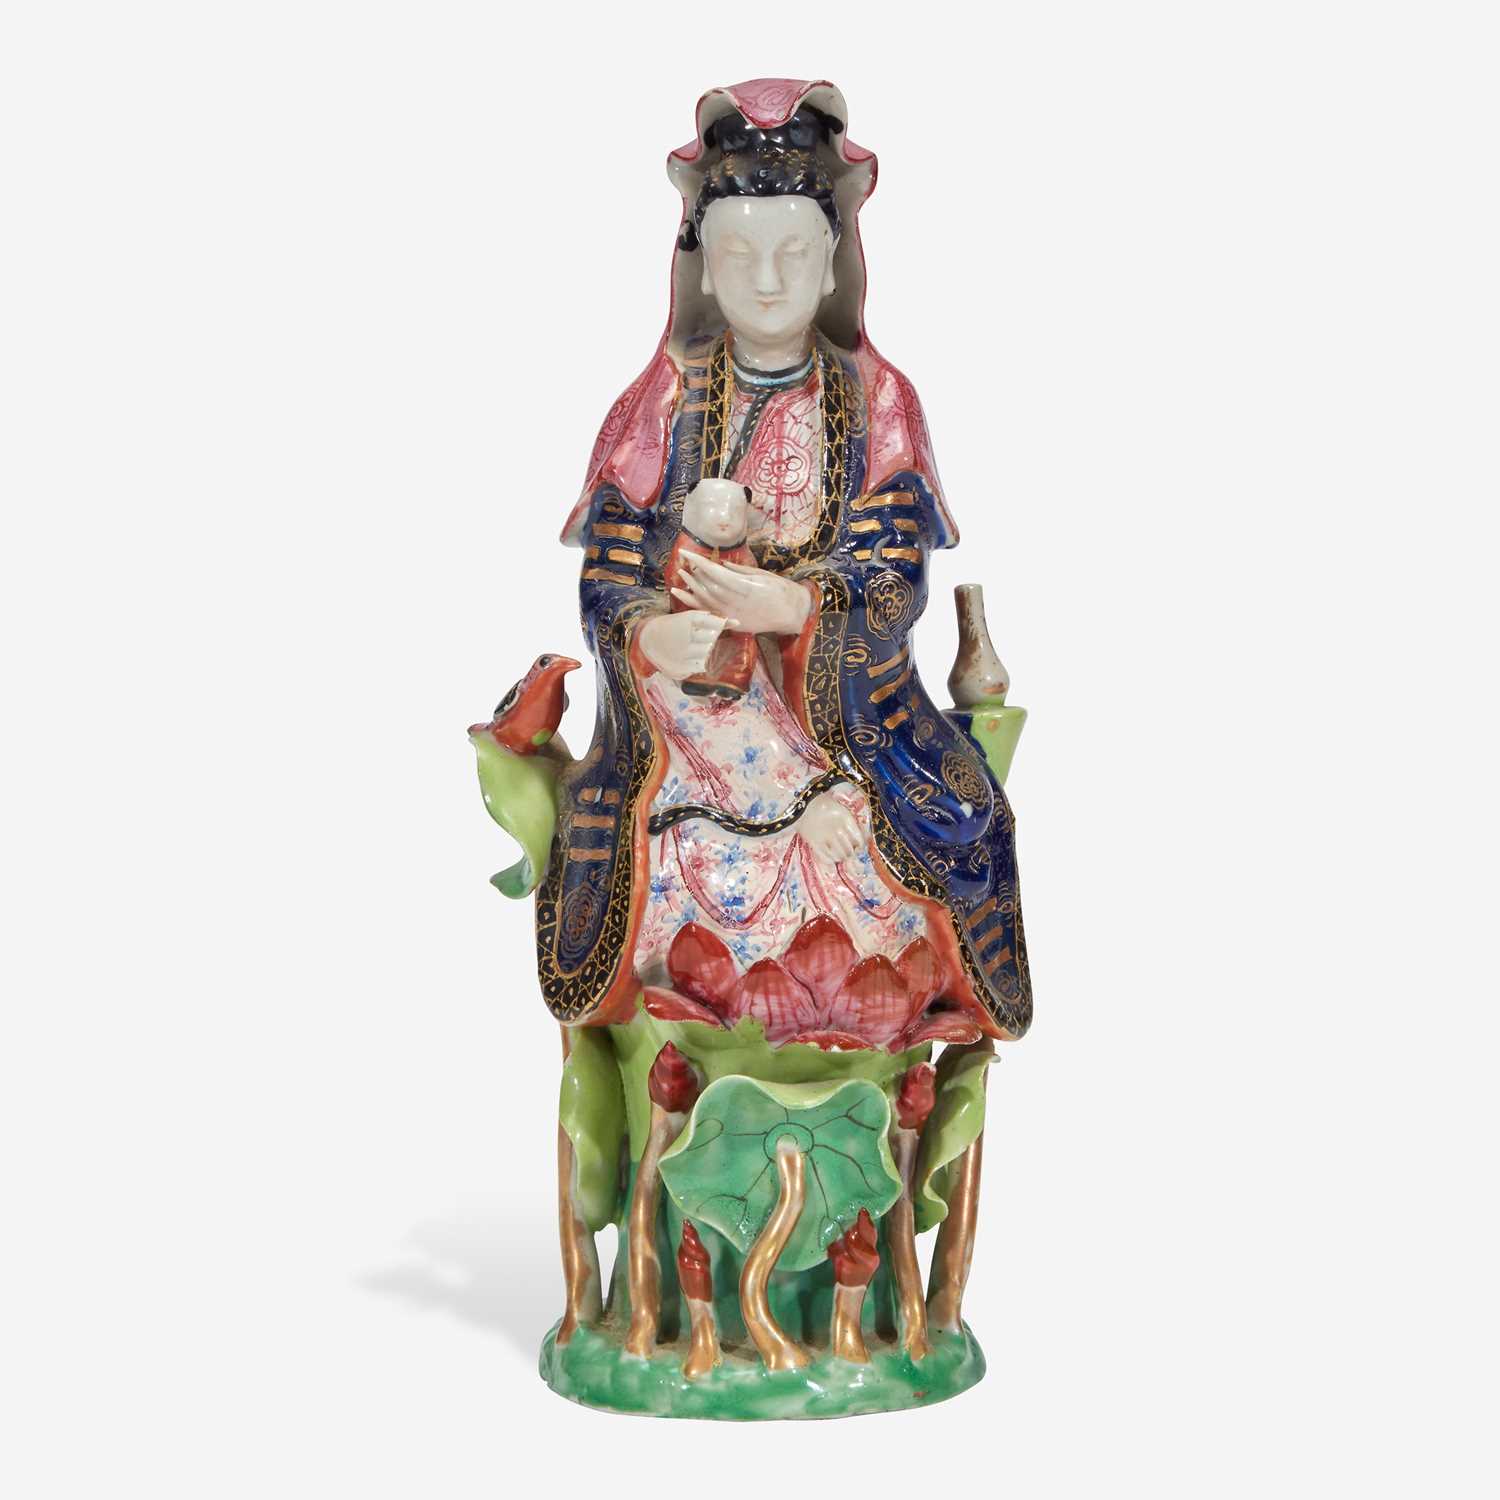 Lot 19 - A Chinese export porcelain famille rose-decorated figure of Guanyin and child 粉彩出口瓷观音送子